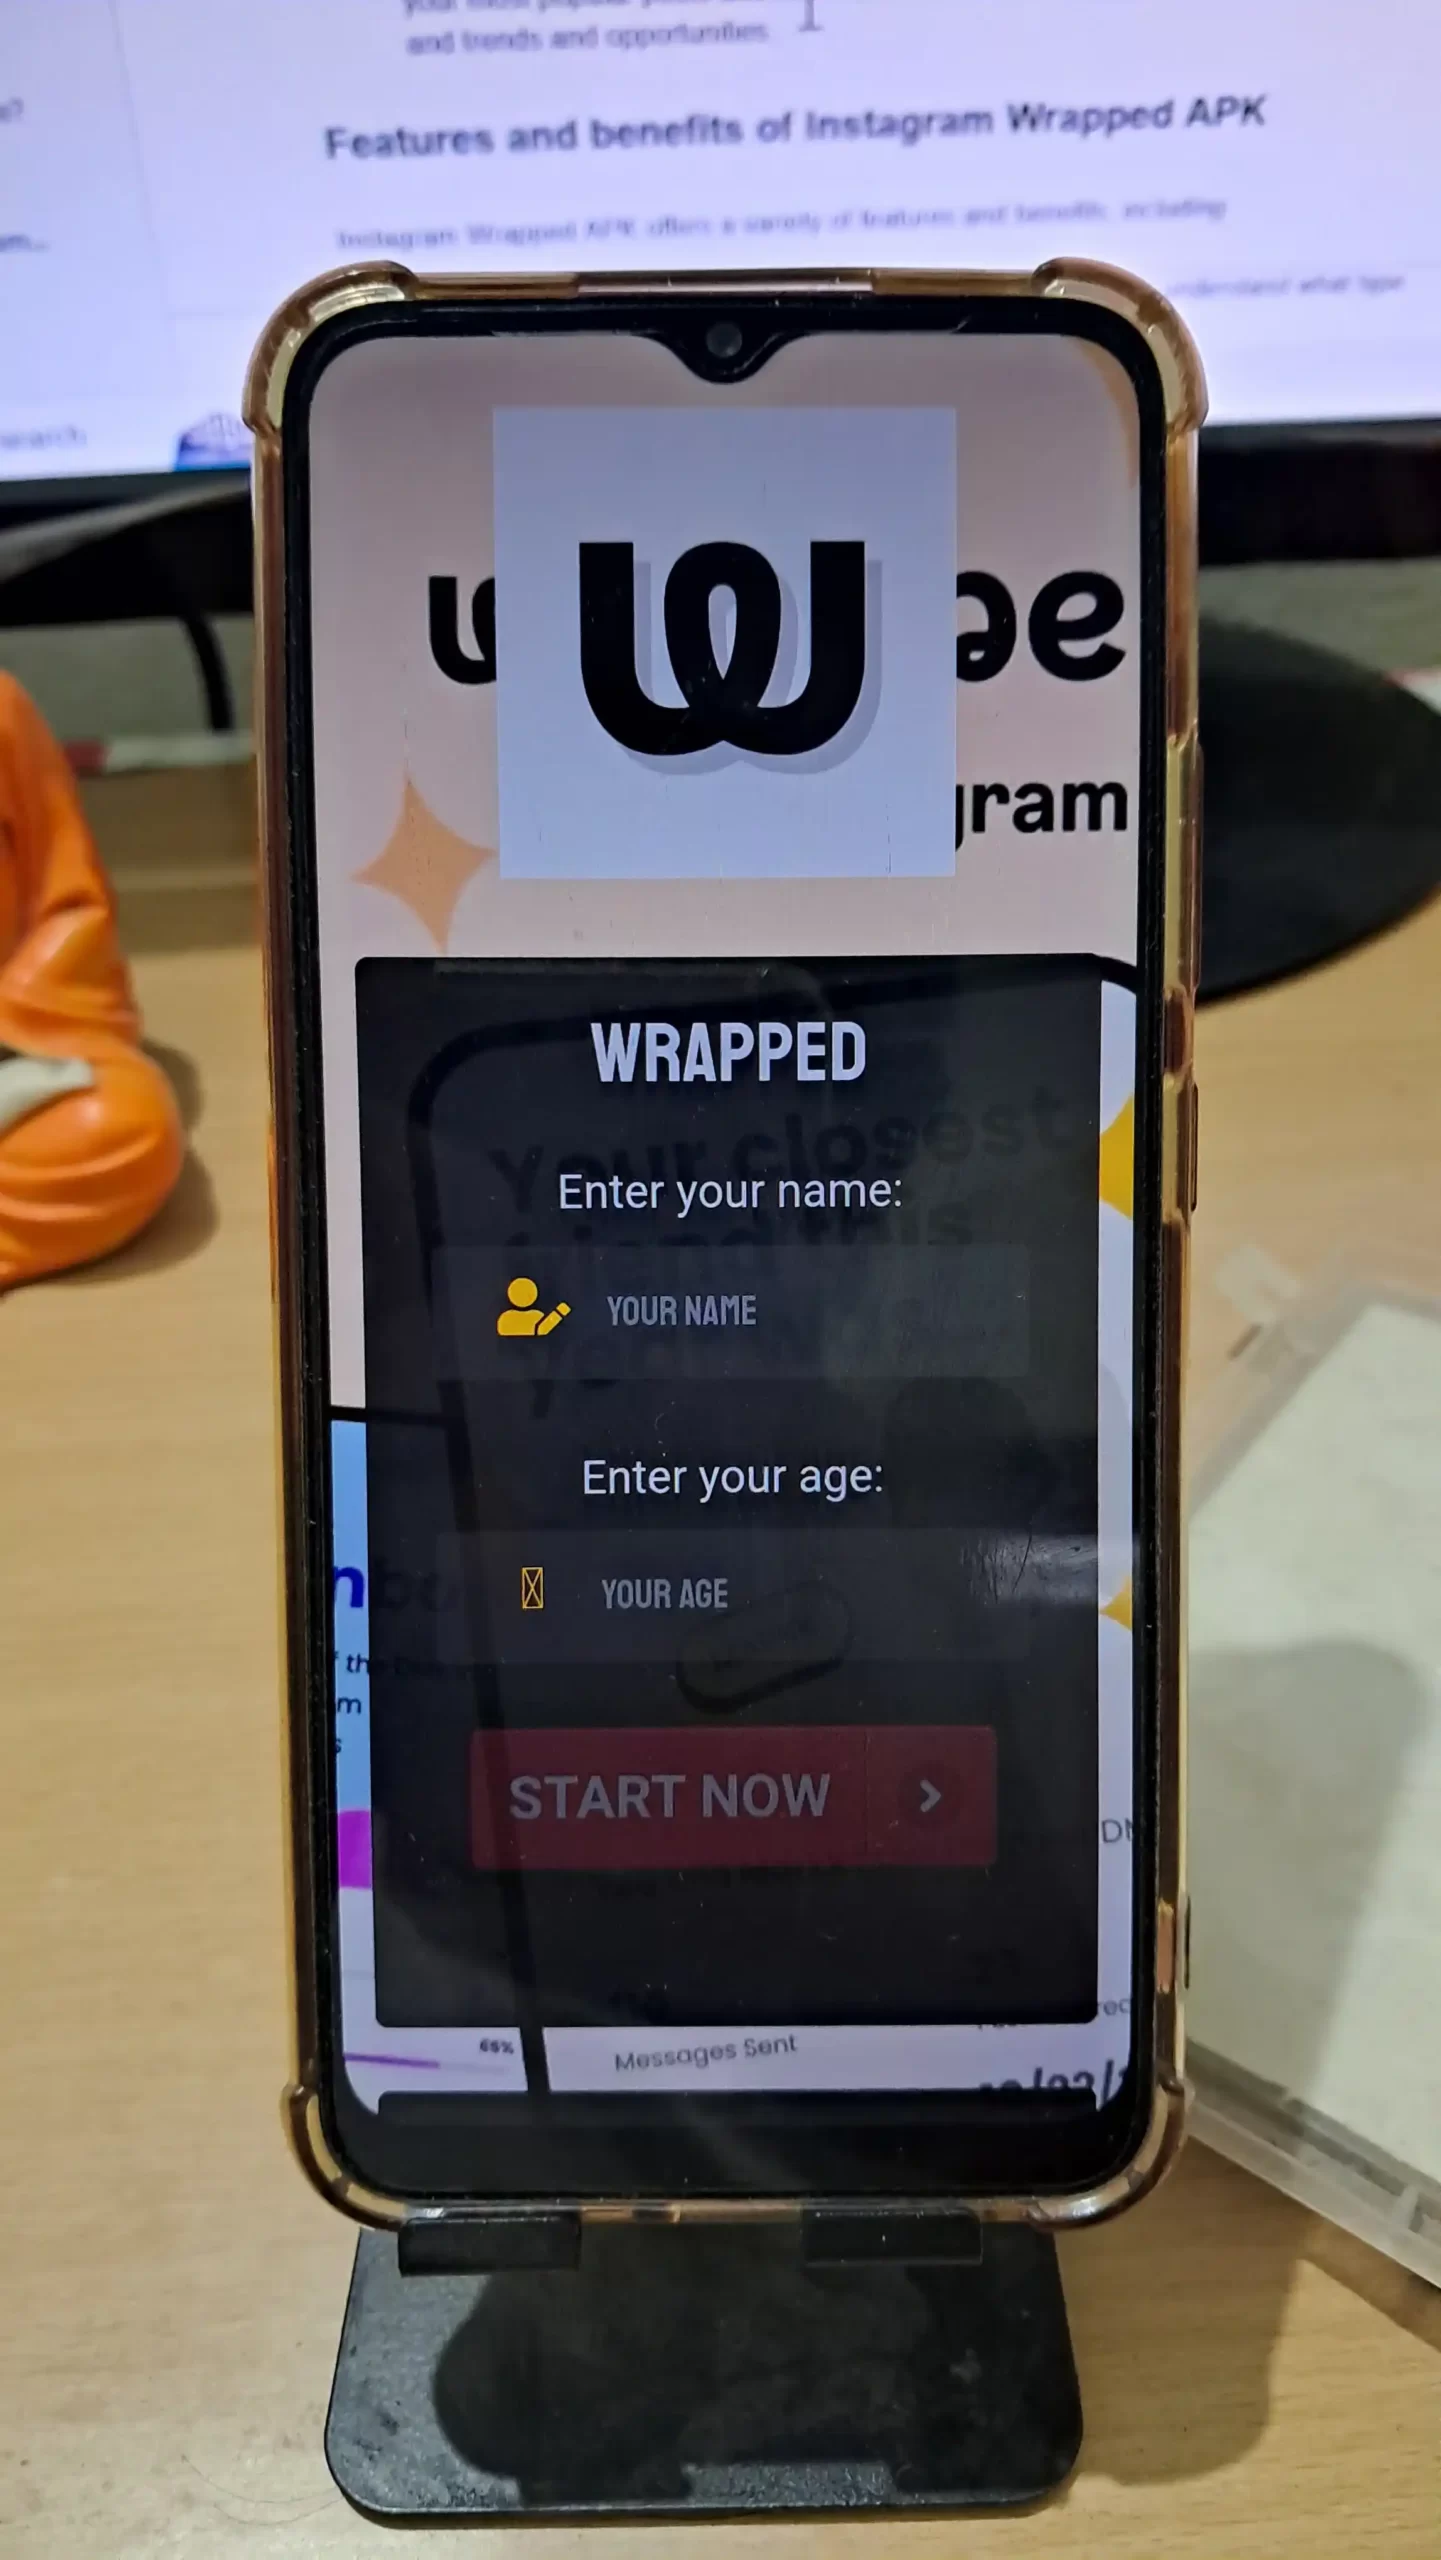 image of wrapped app opened